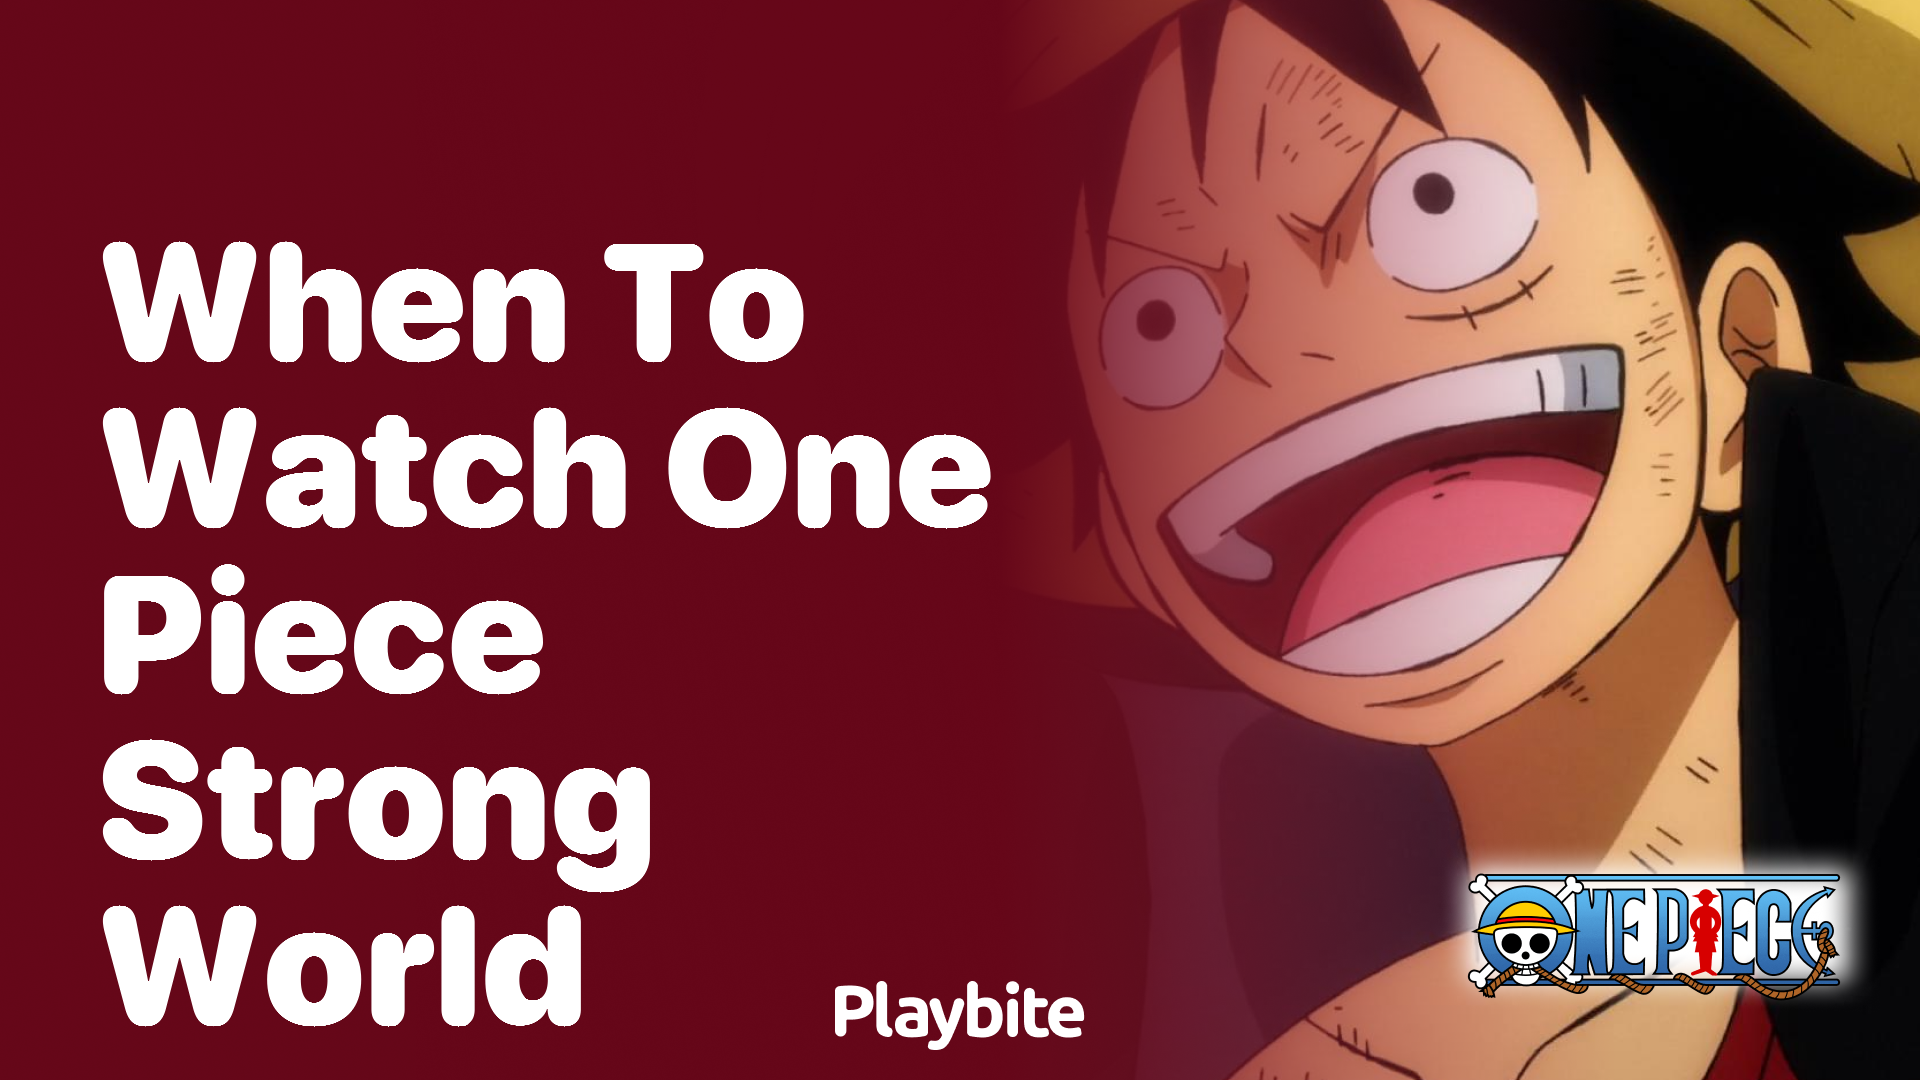 When to watch One Piece: Strong World?